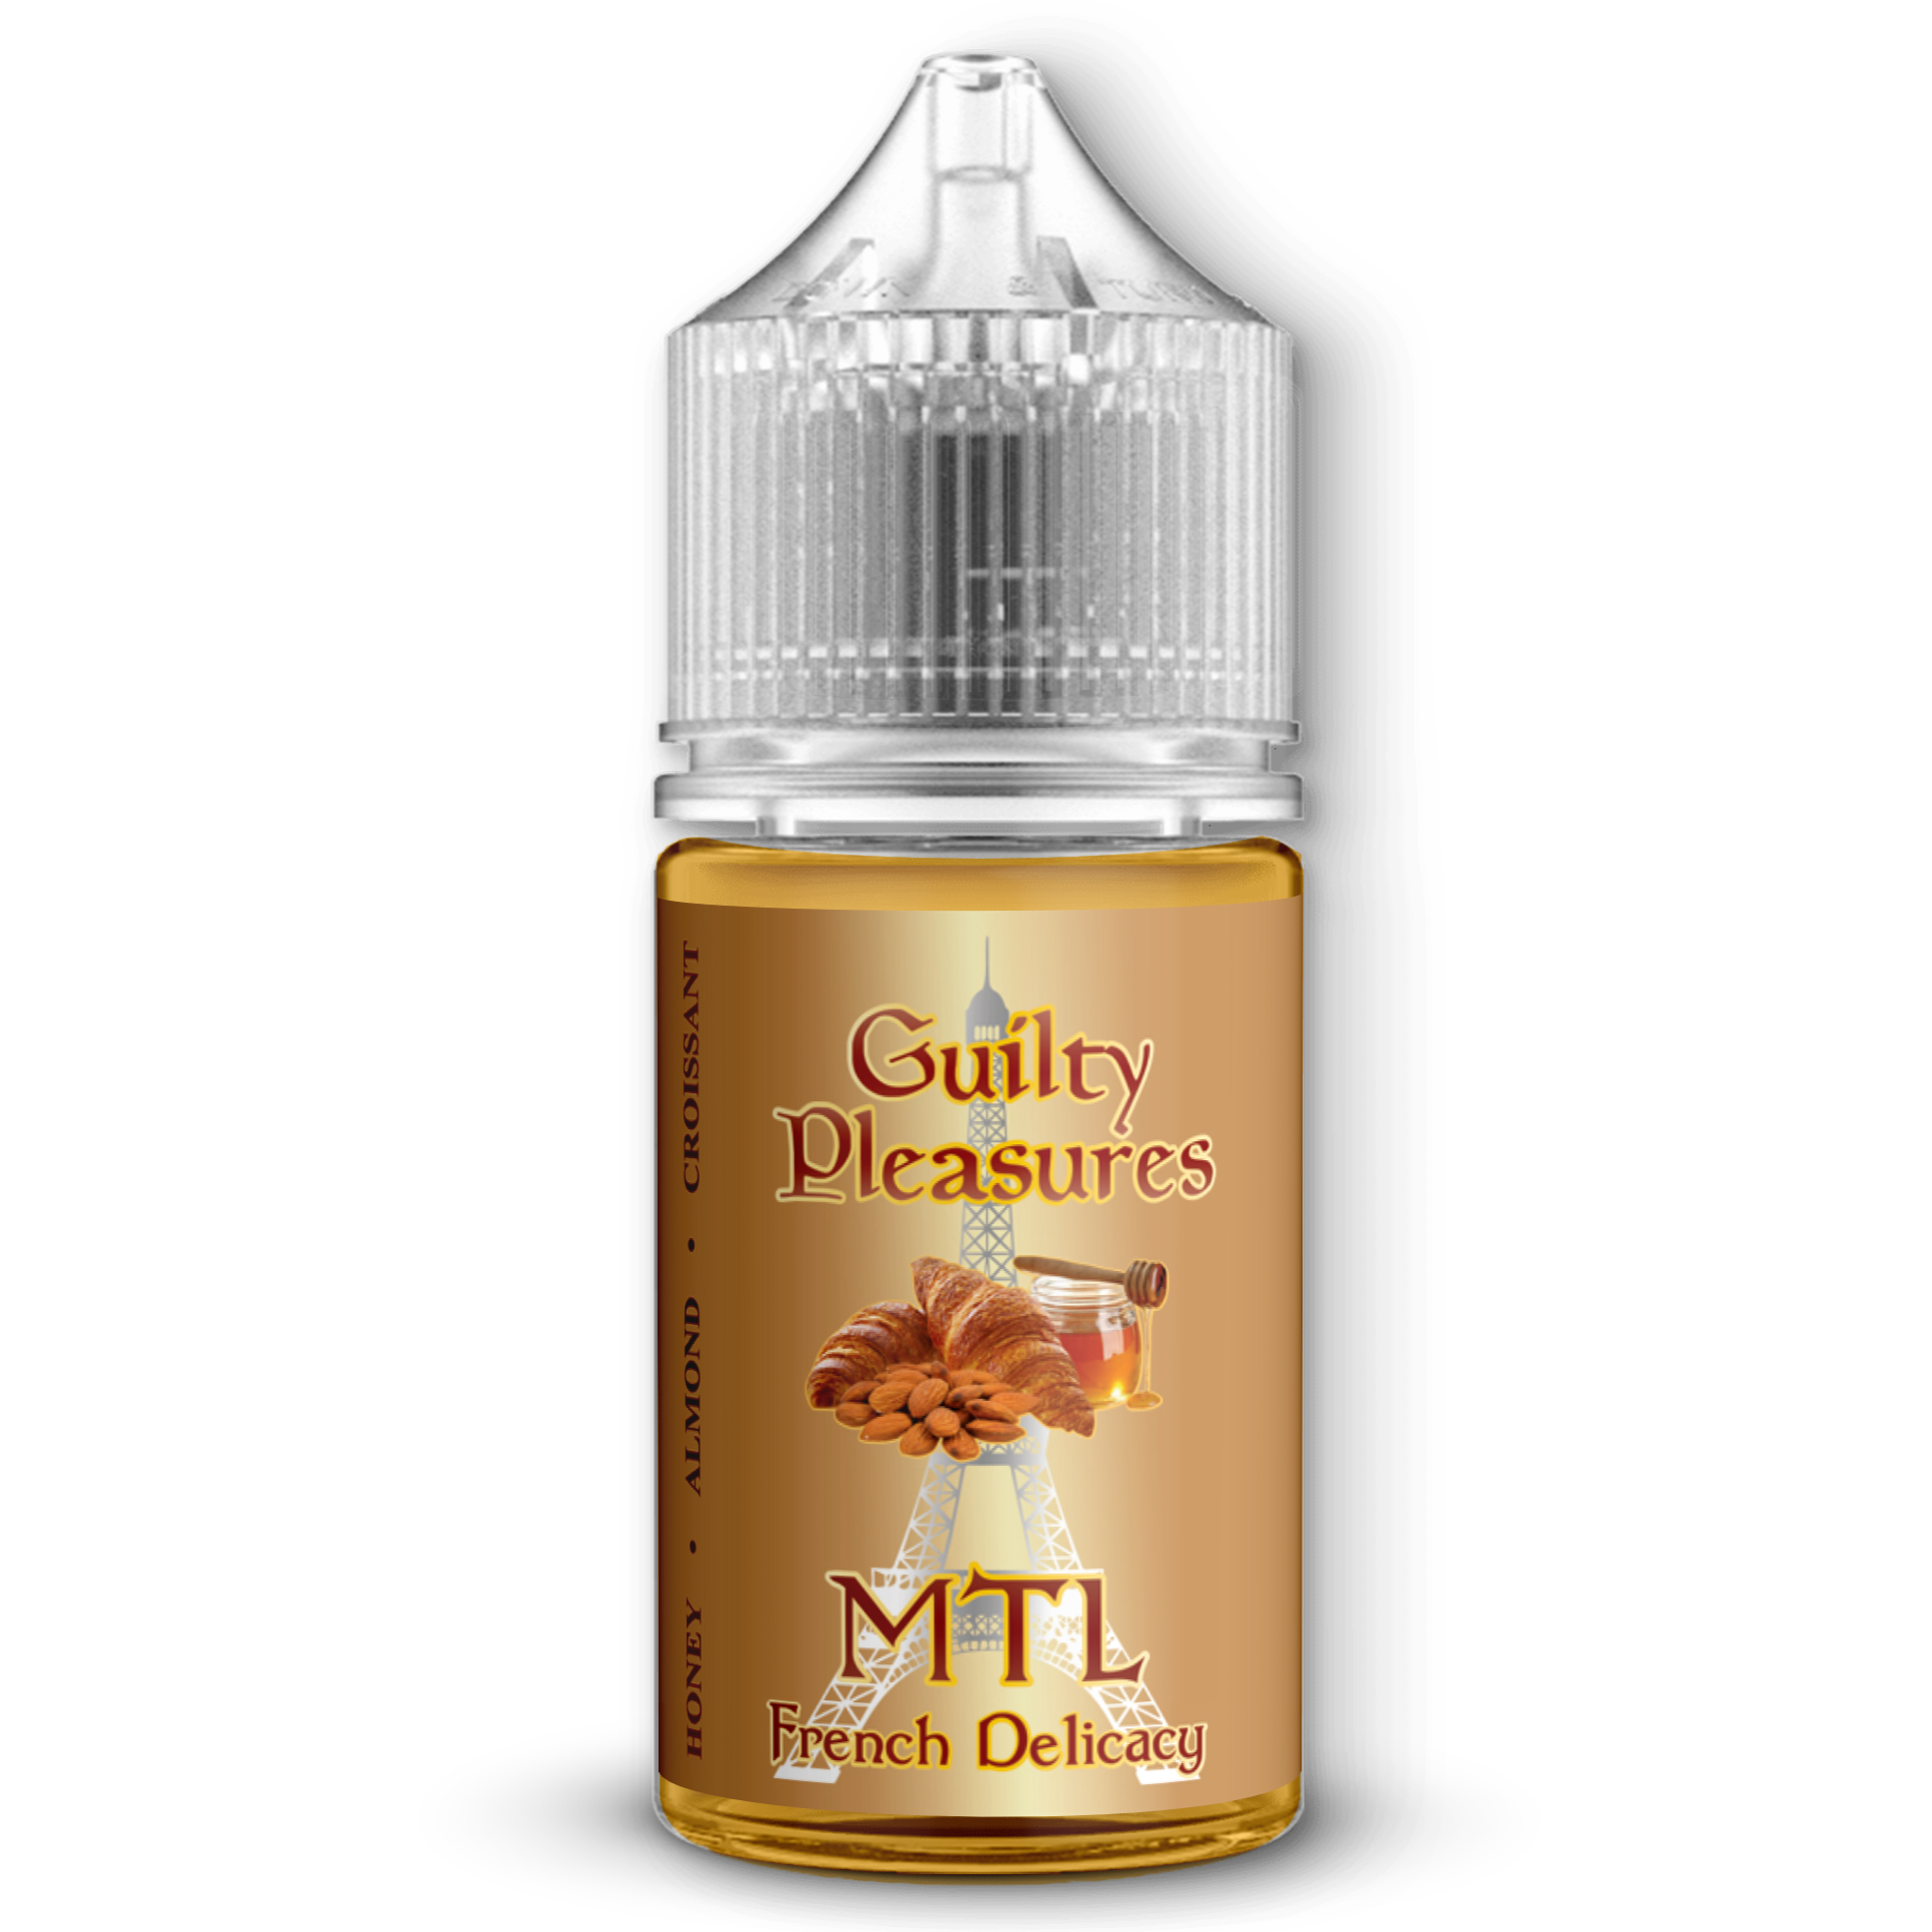 Guilty Pleasures- French Delicacy | MTL | 12mg | 30ml